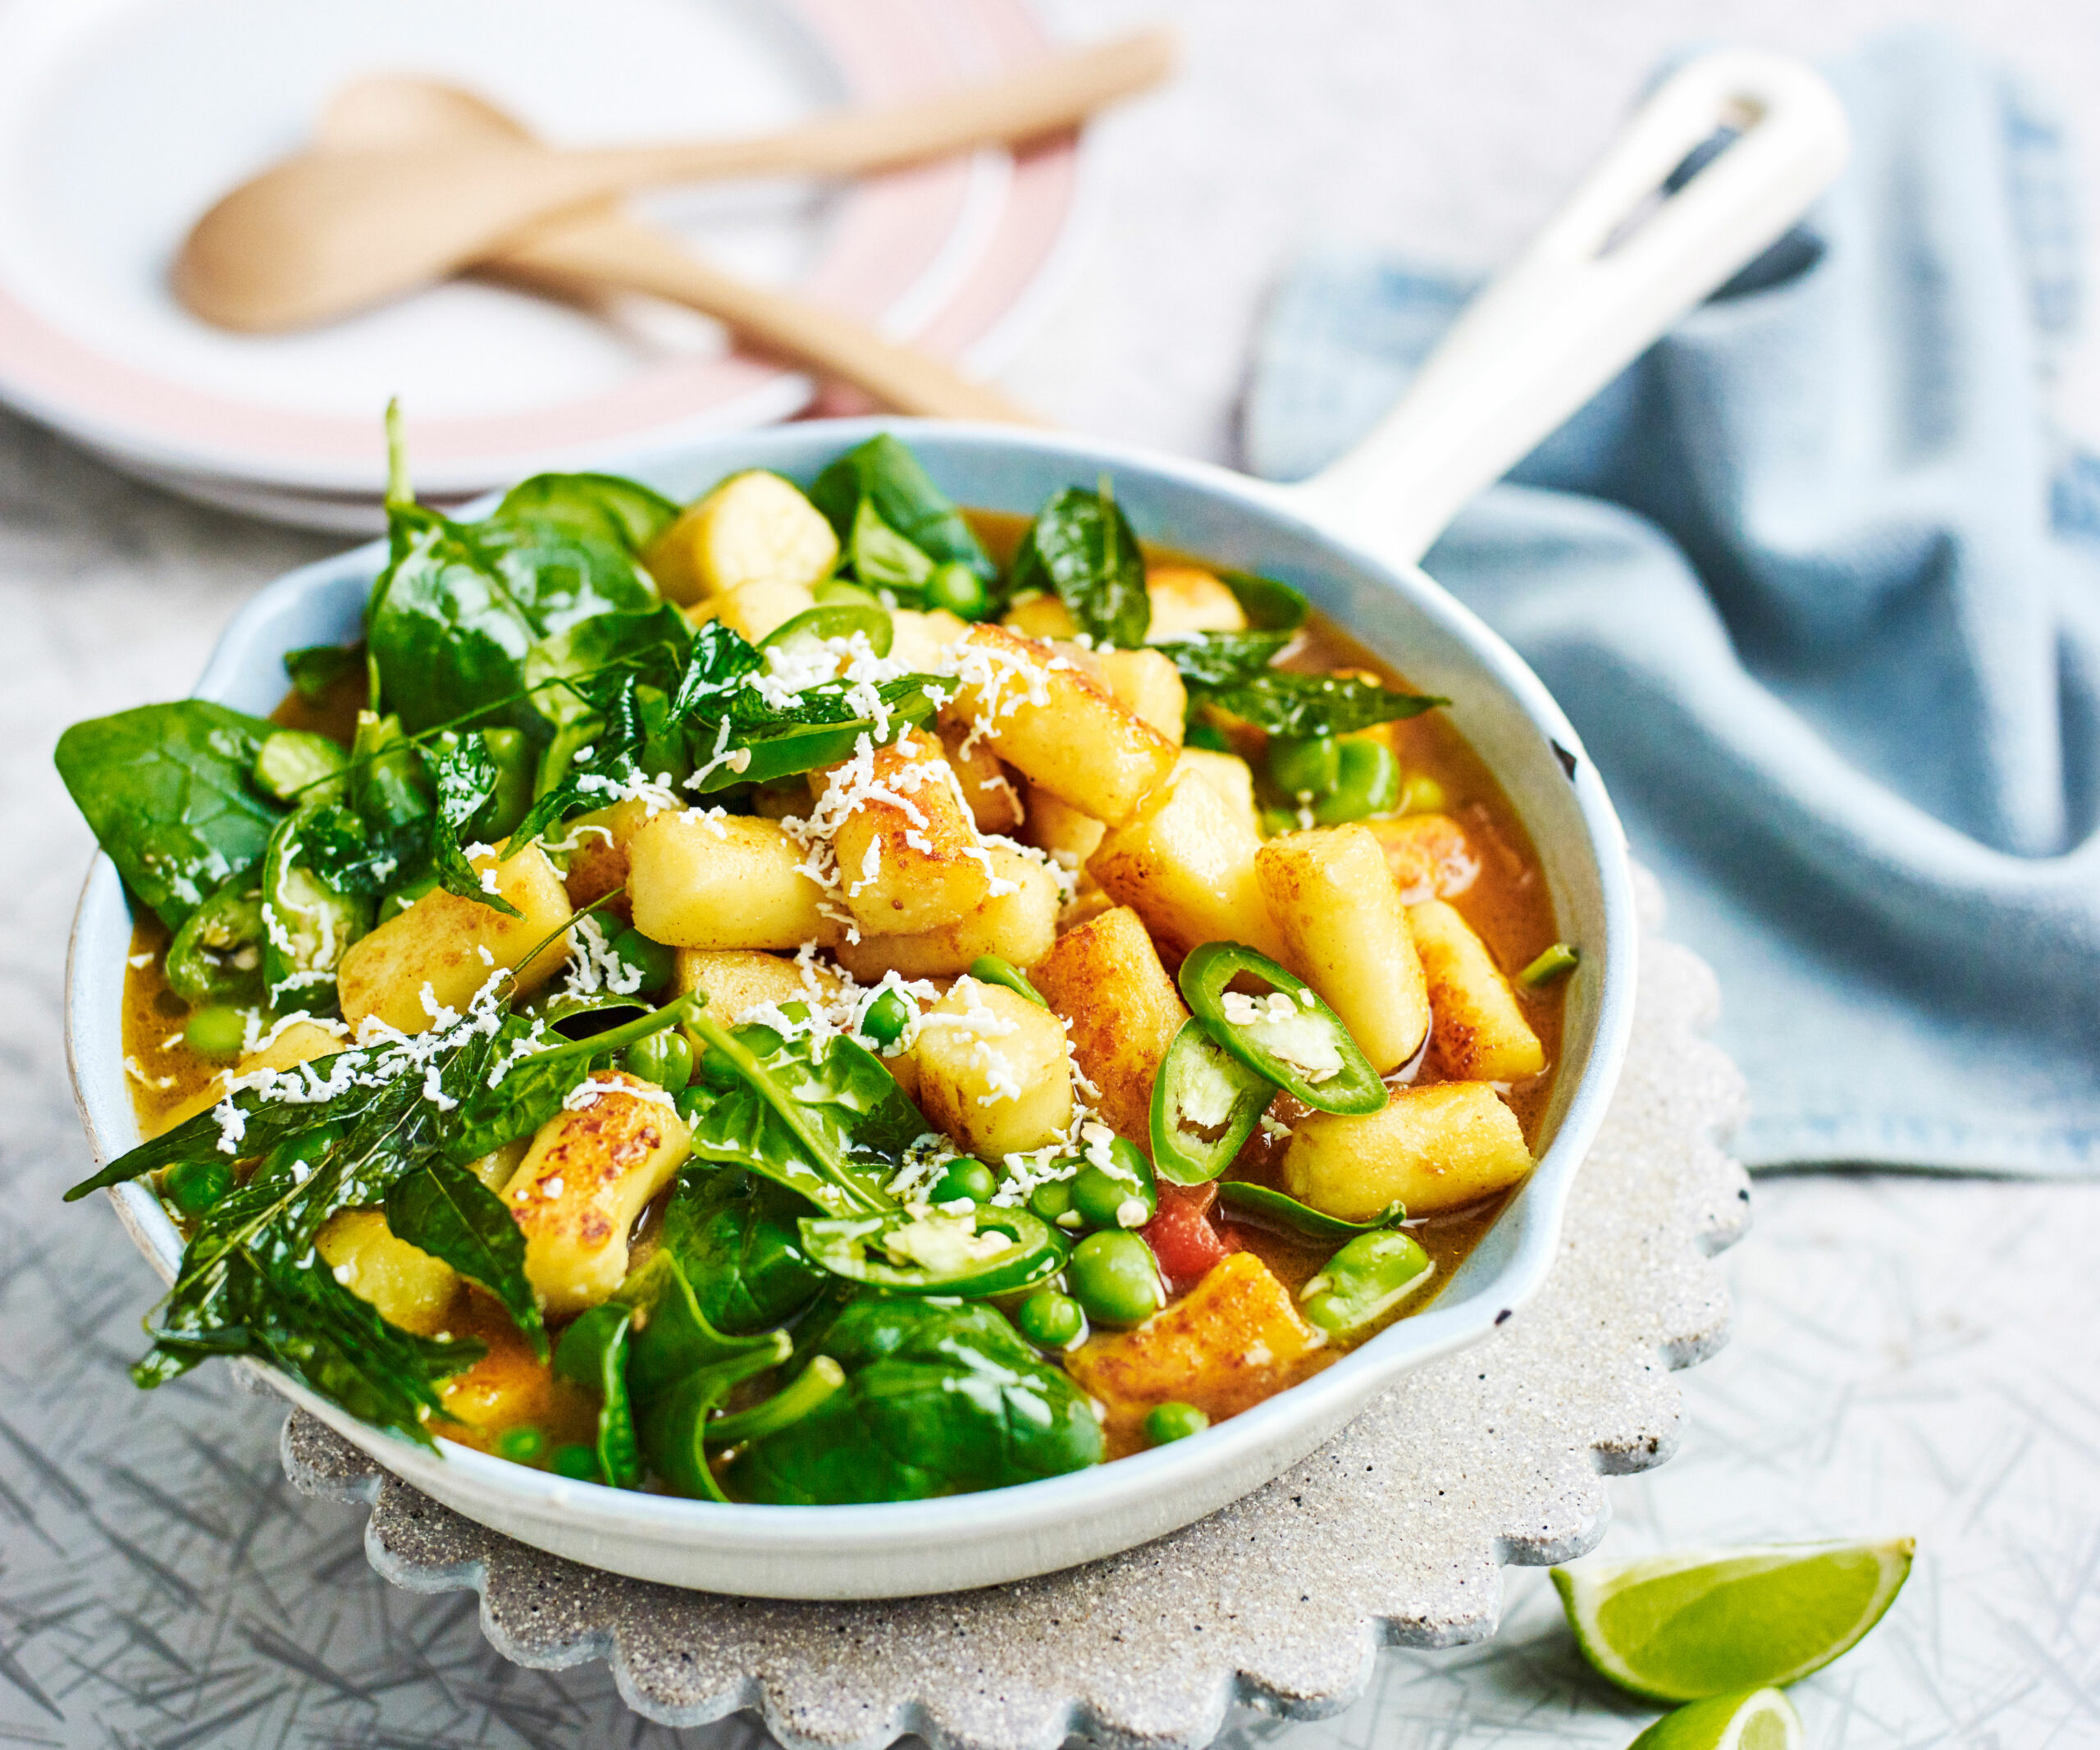 Indian style gnocchi recipe with green veg masala curry